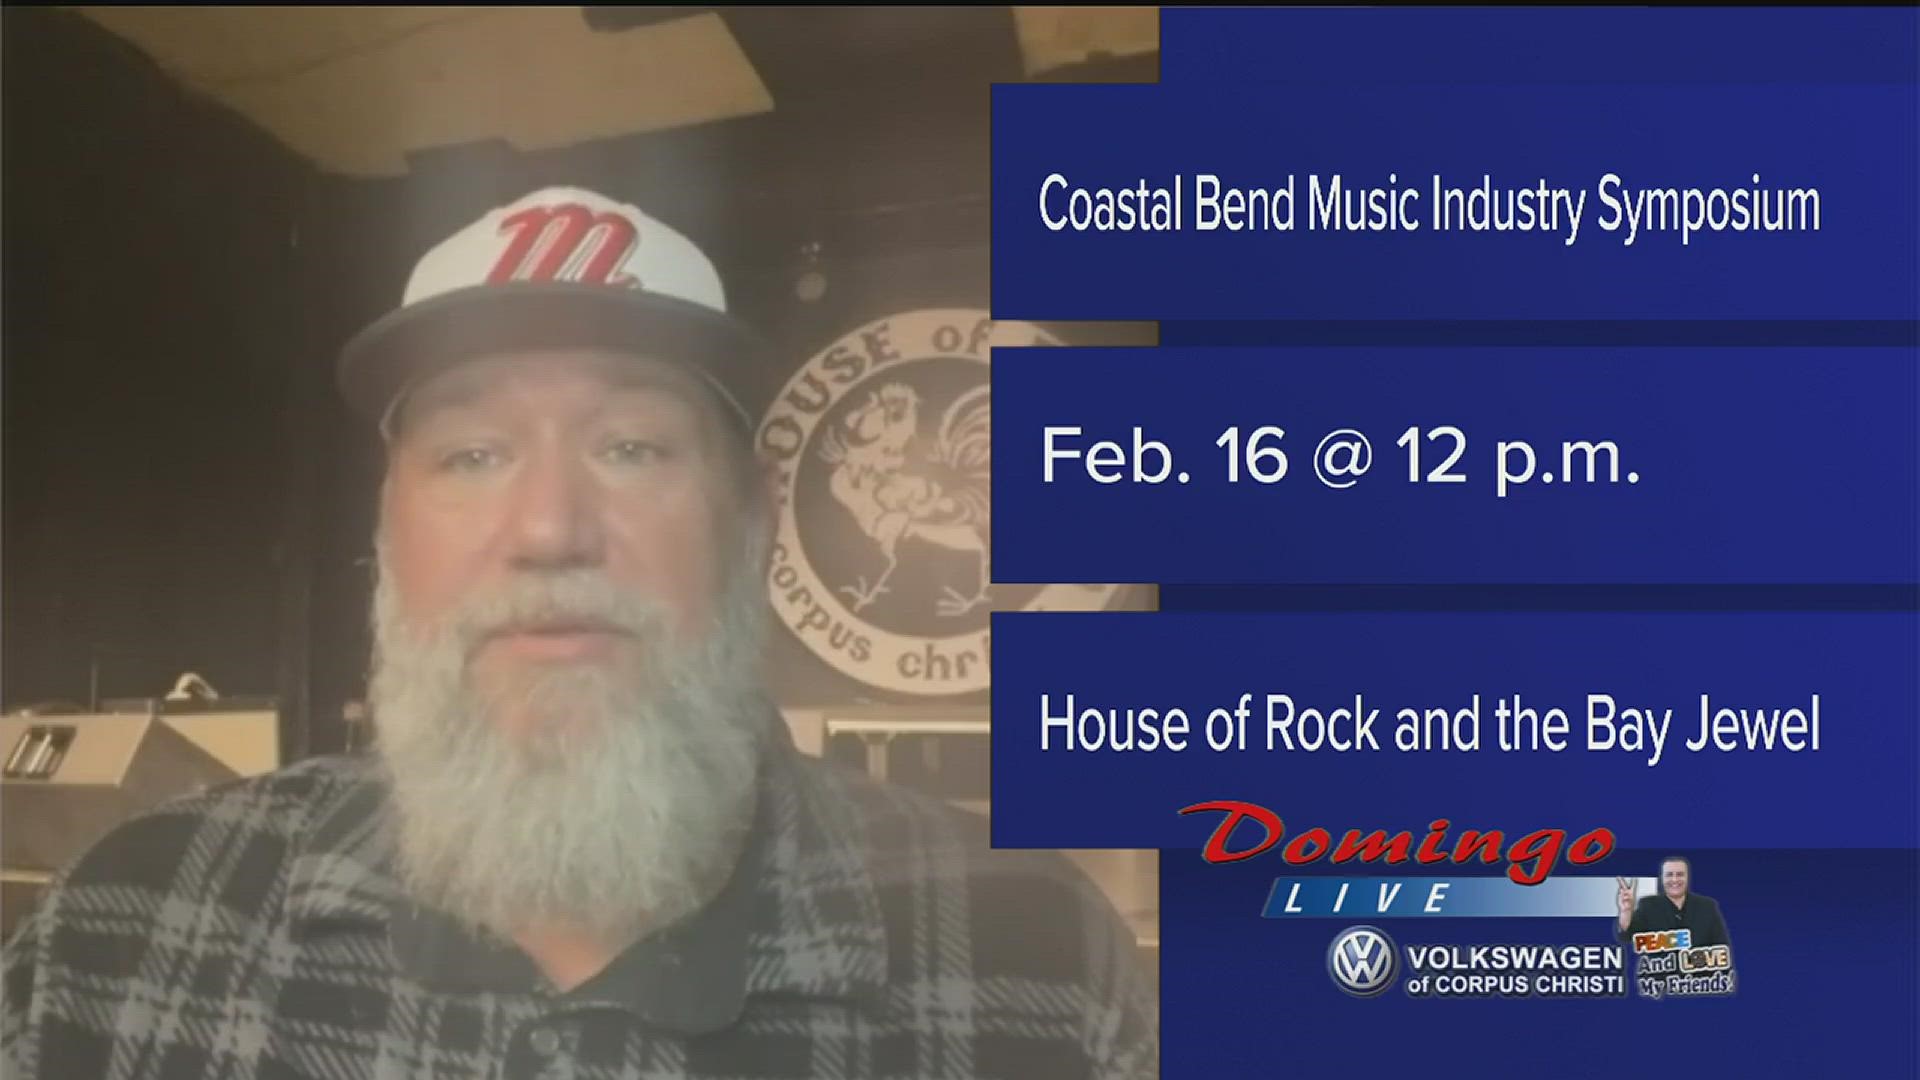 House of Rock owner Casey Lain joined us live to invite music professionals across South Texas to the first Coastal Bend Music Industry Symposium.